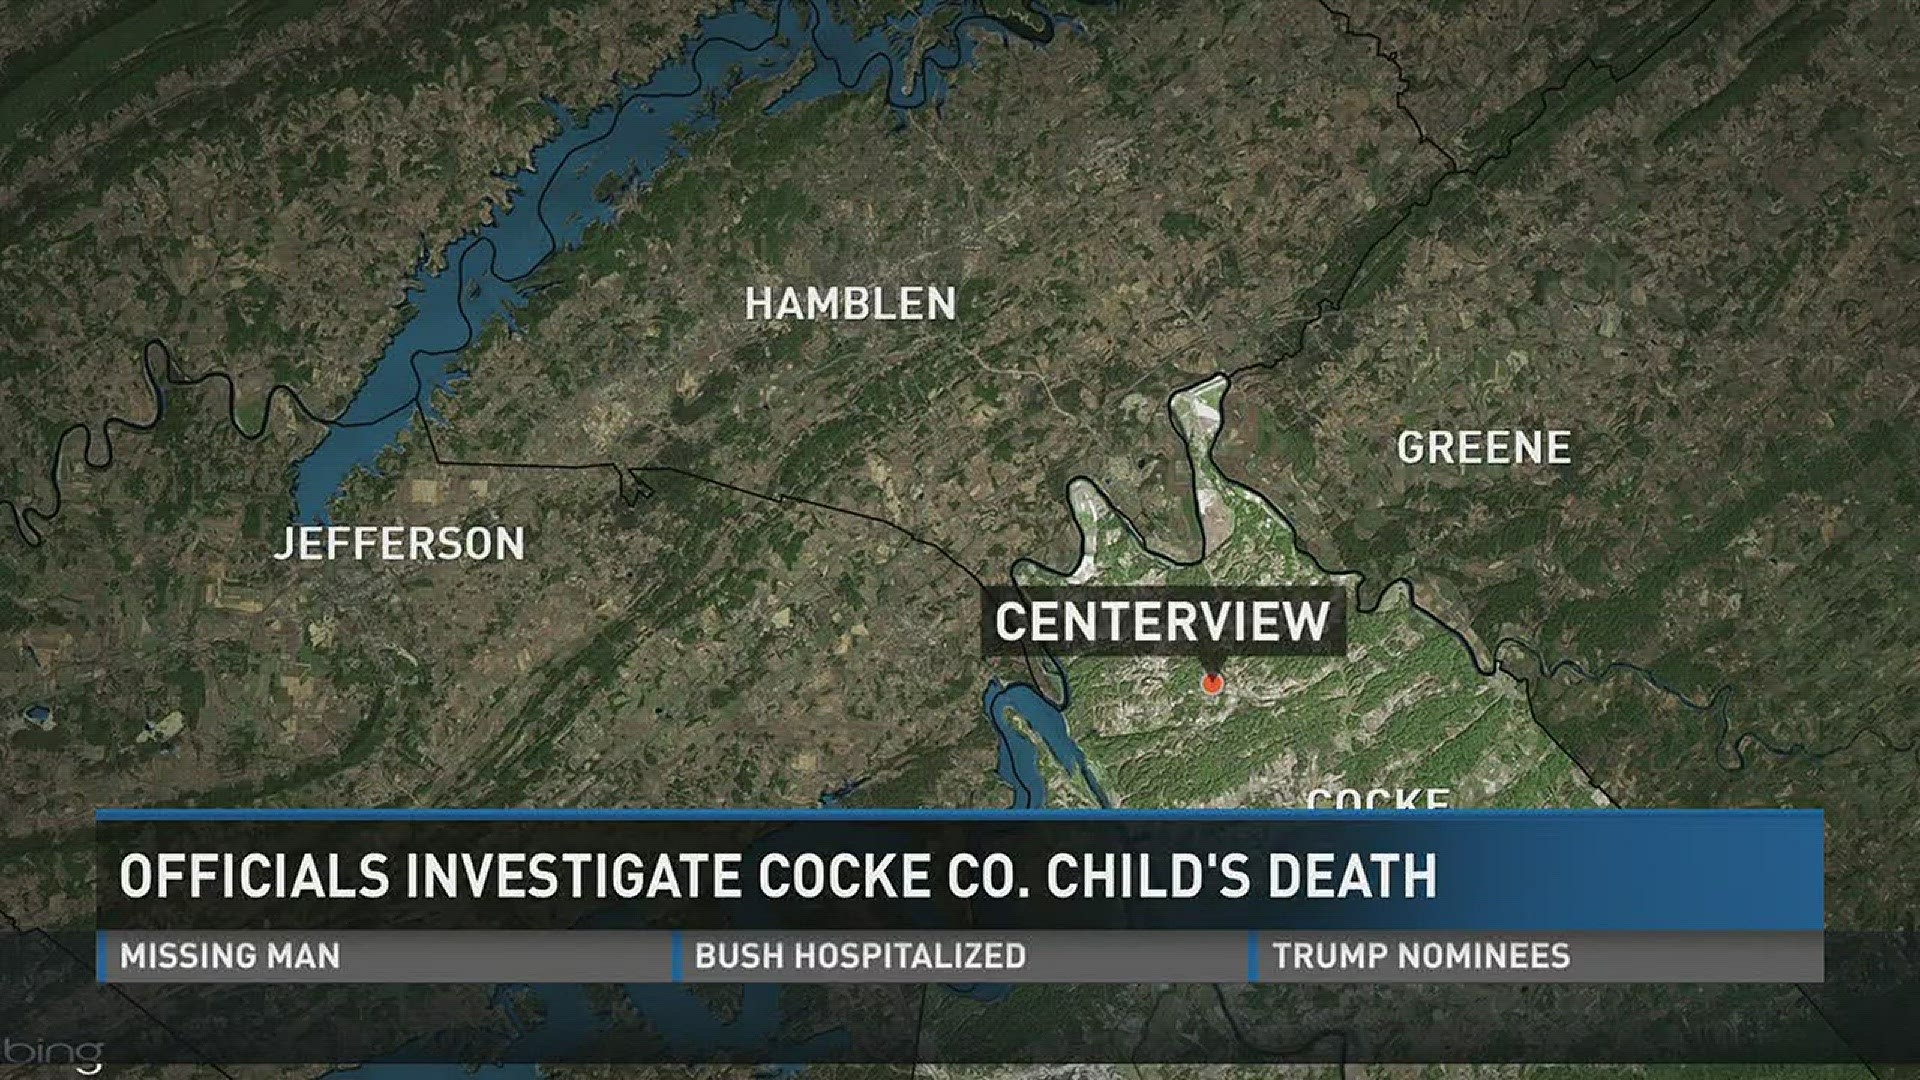 Jan. 18, 2017: The Cocke County Sheriff's Office and the TBI are investigating the shooting death of a 12-year-old child.